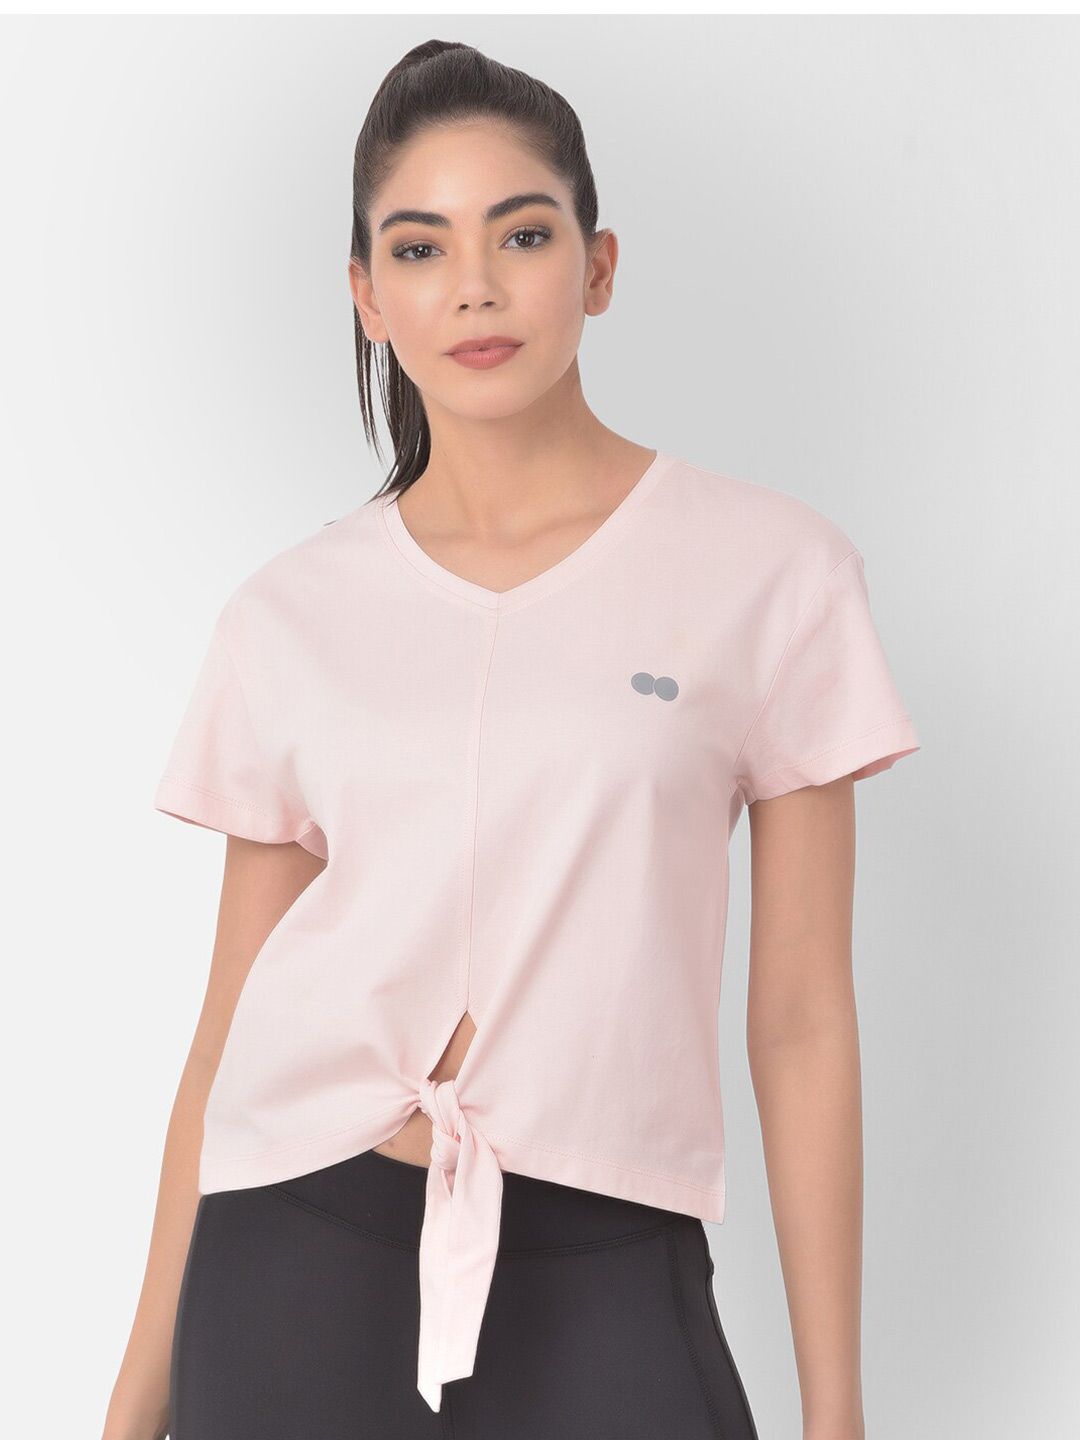 Clovia Women Pink V-Neck Training or Gym T-shirt Price in India